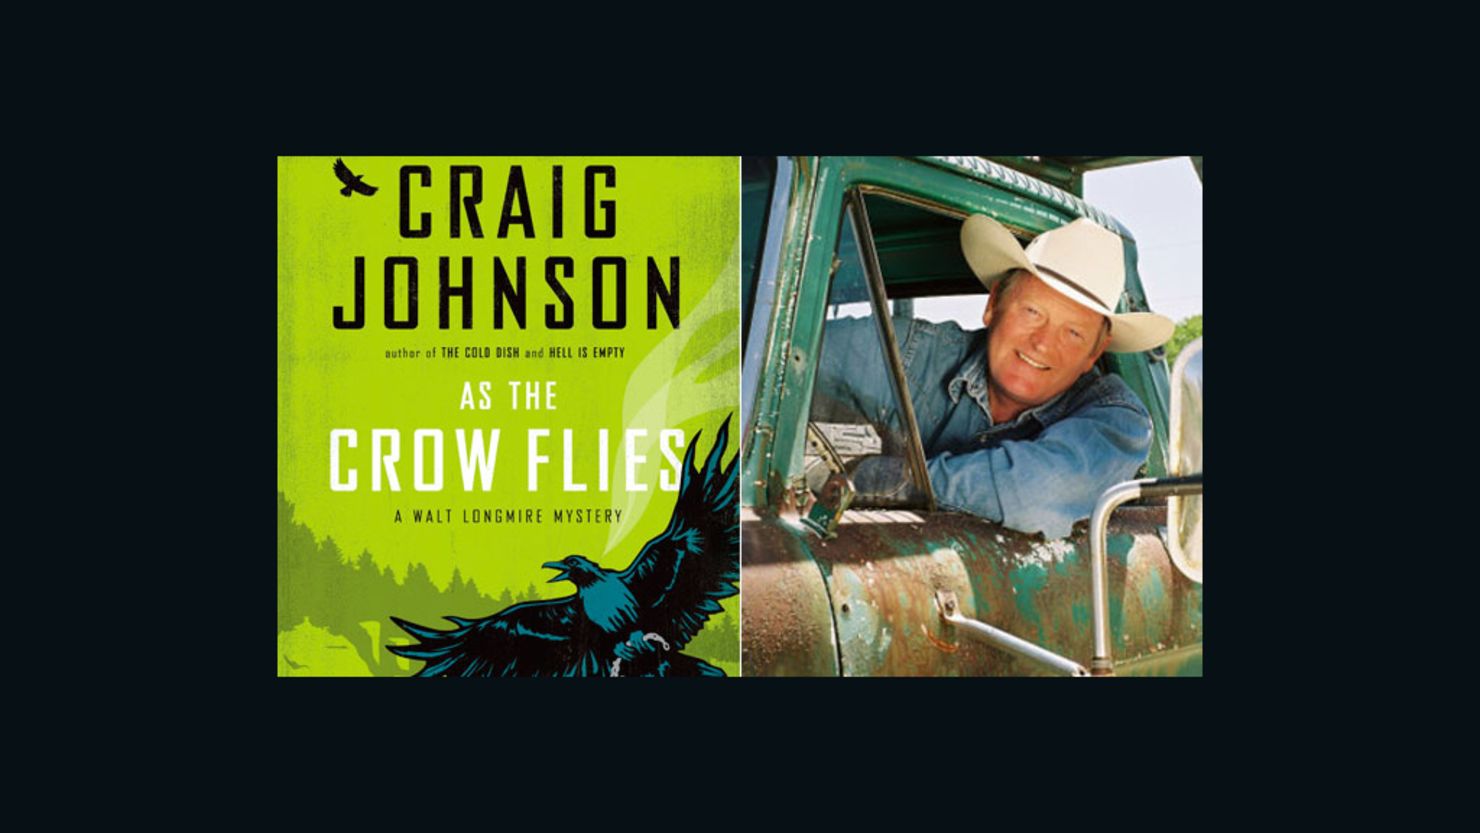 Craig Johnson's Sheriff Walter Longmire solves crimes on the Wyoming frontier.